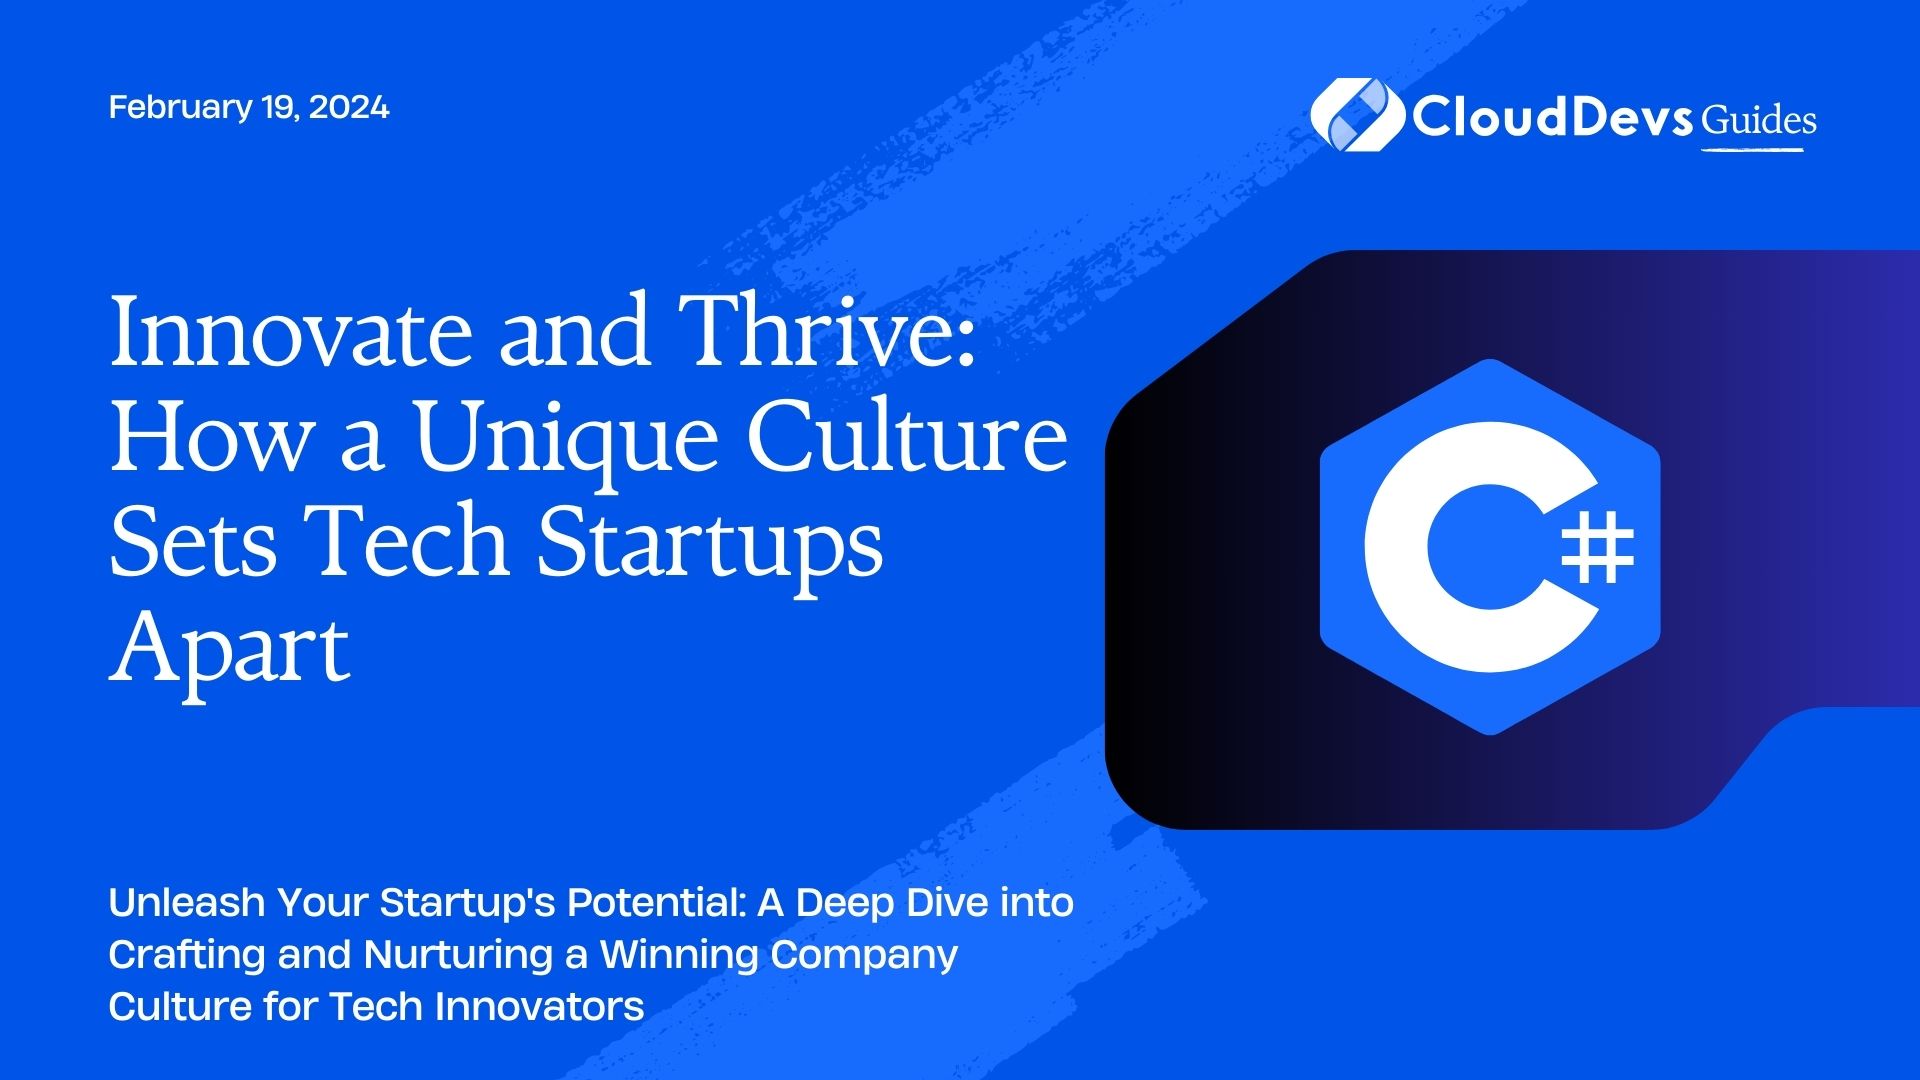 Innovate and Thrive: How a Unique Culture Sets Tech Startups Apart